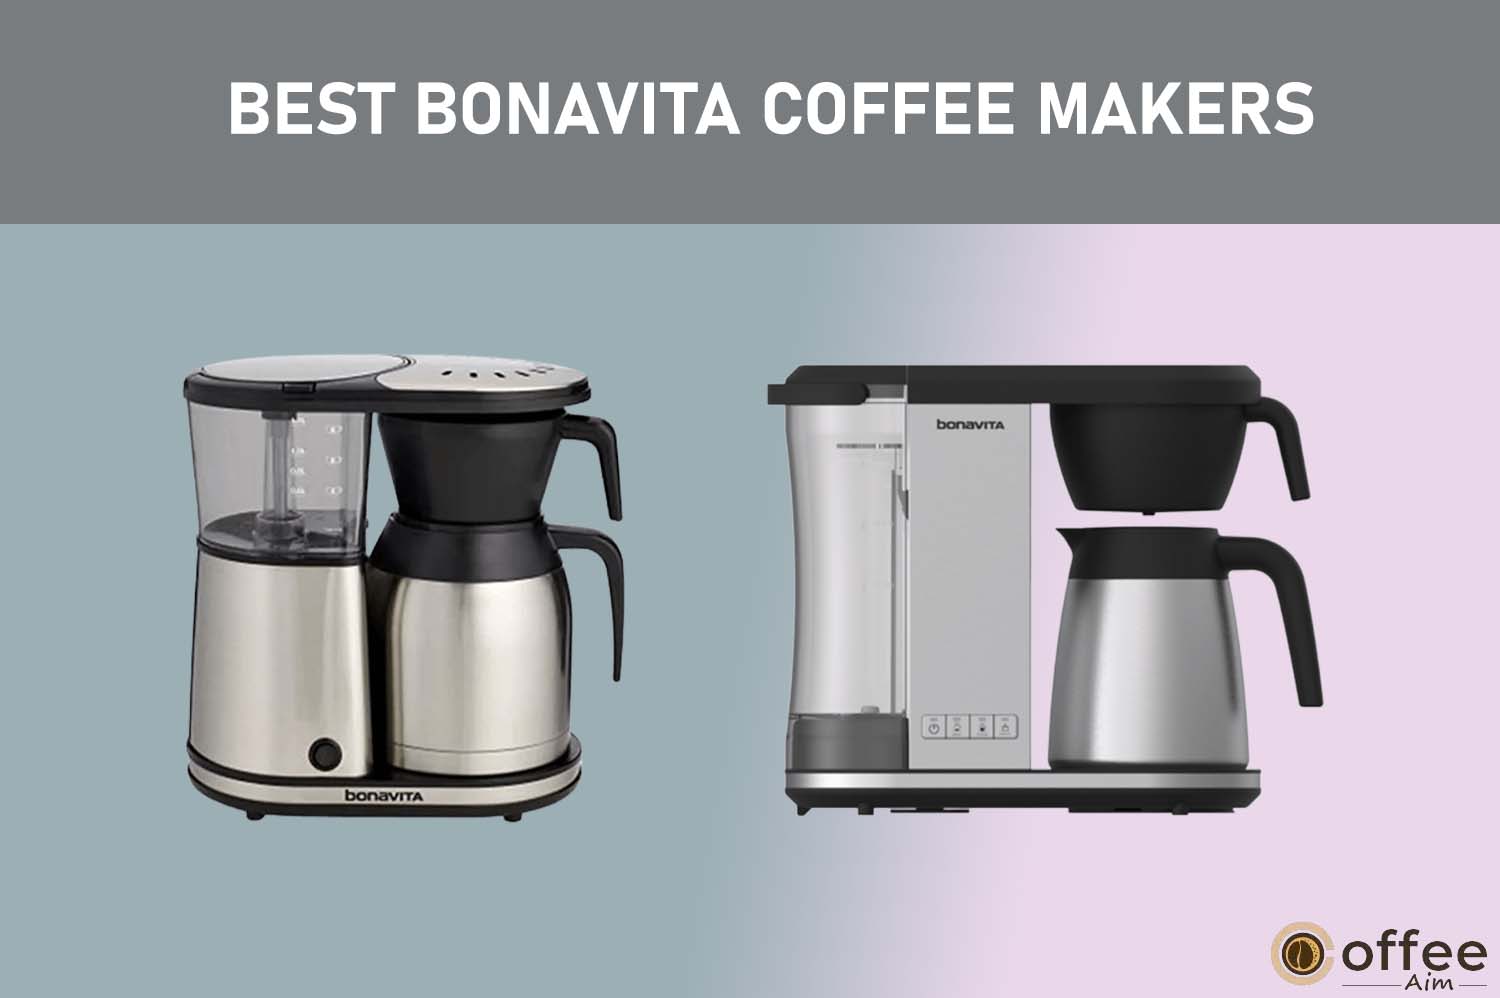 Featured image for the article "Best Bonavita Coffee Makers"